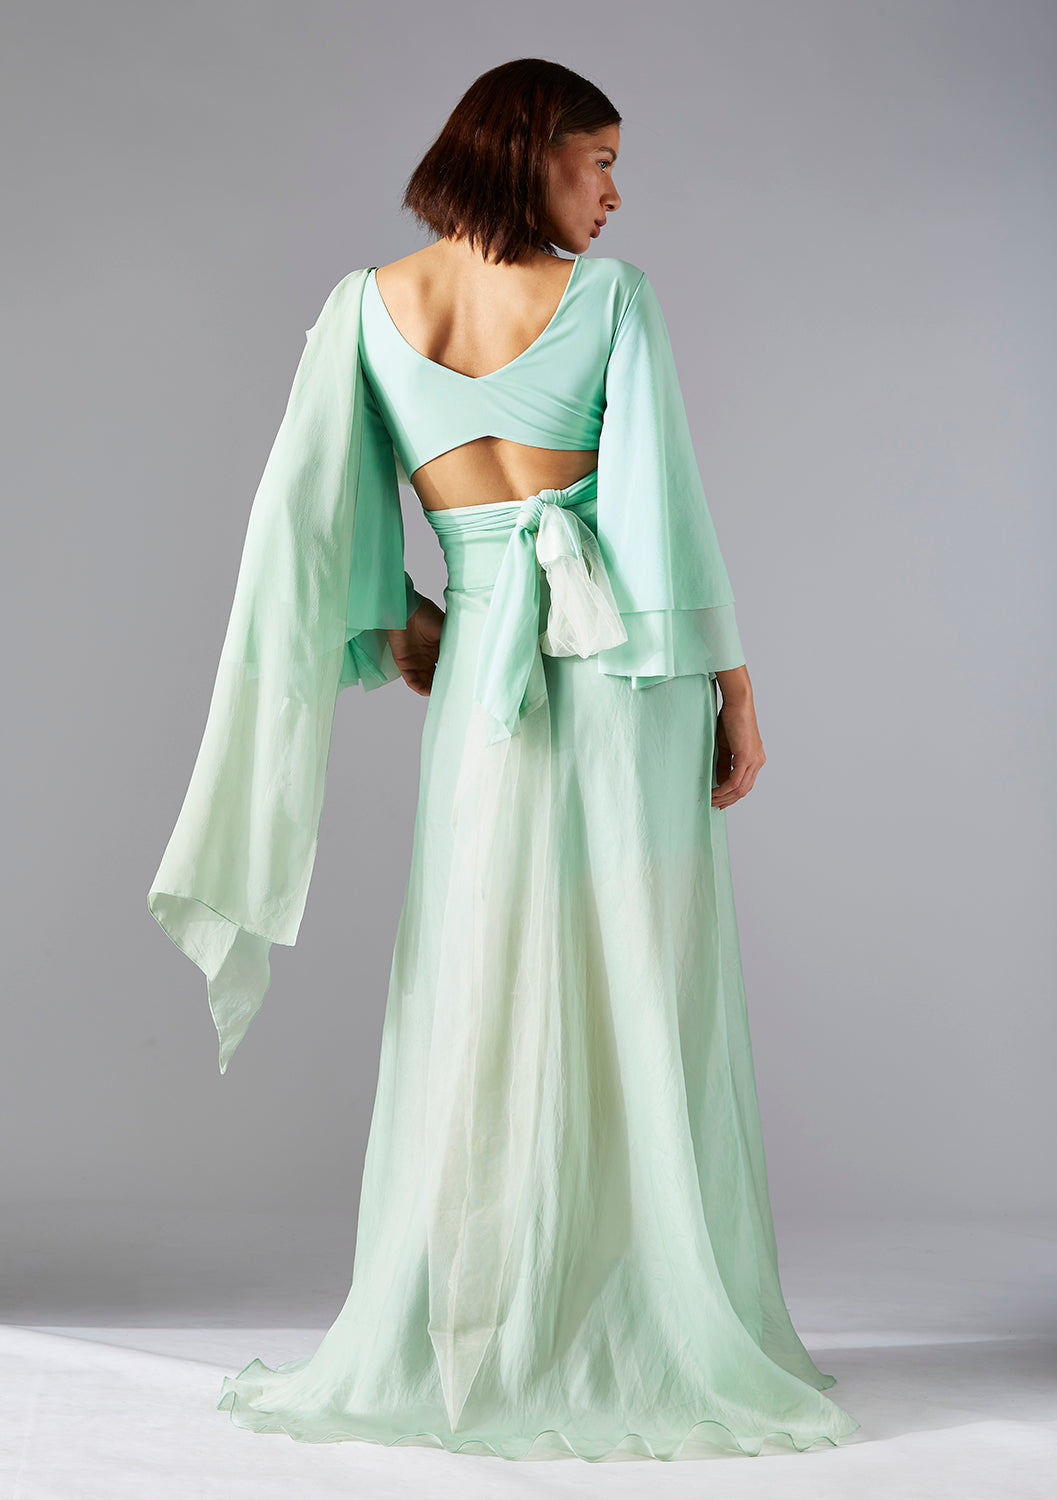 Drape blouse and a- line skirt with rose stole